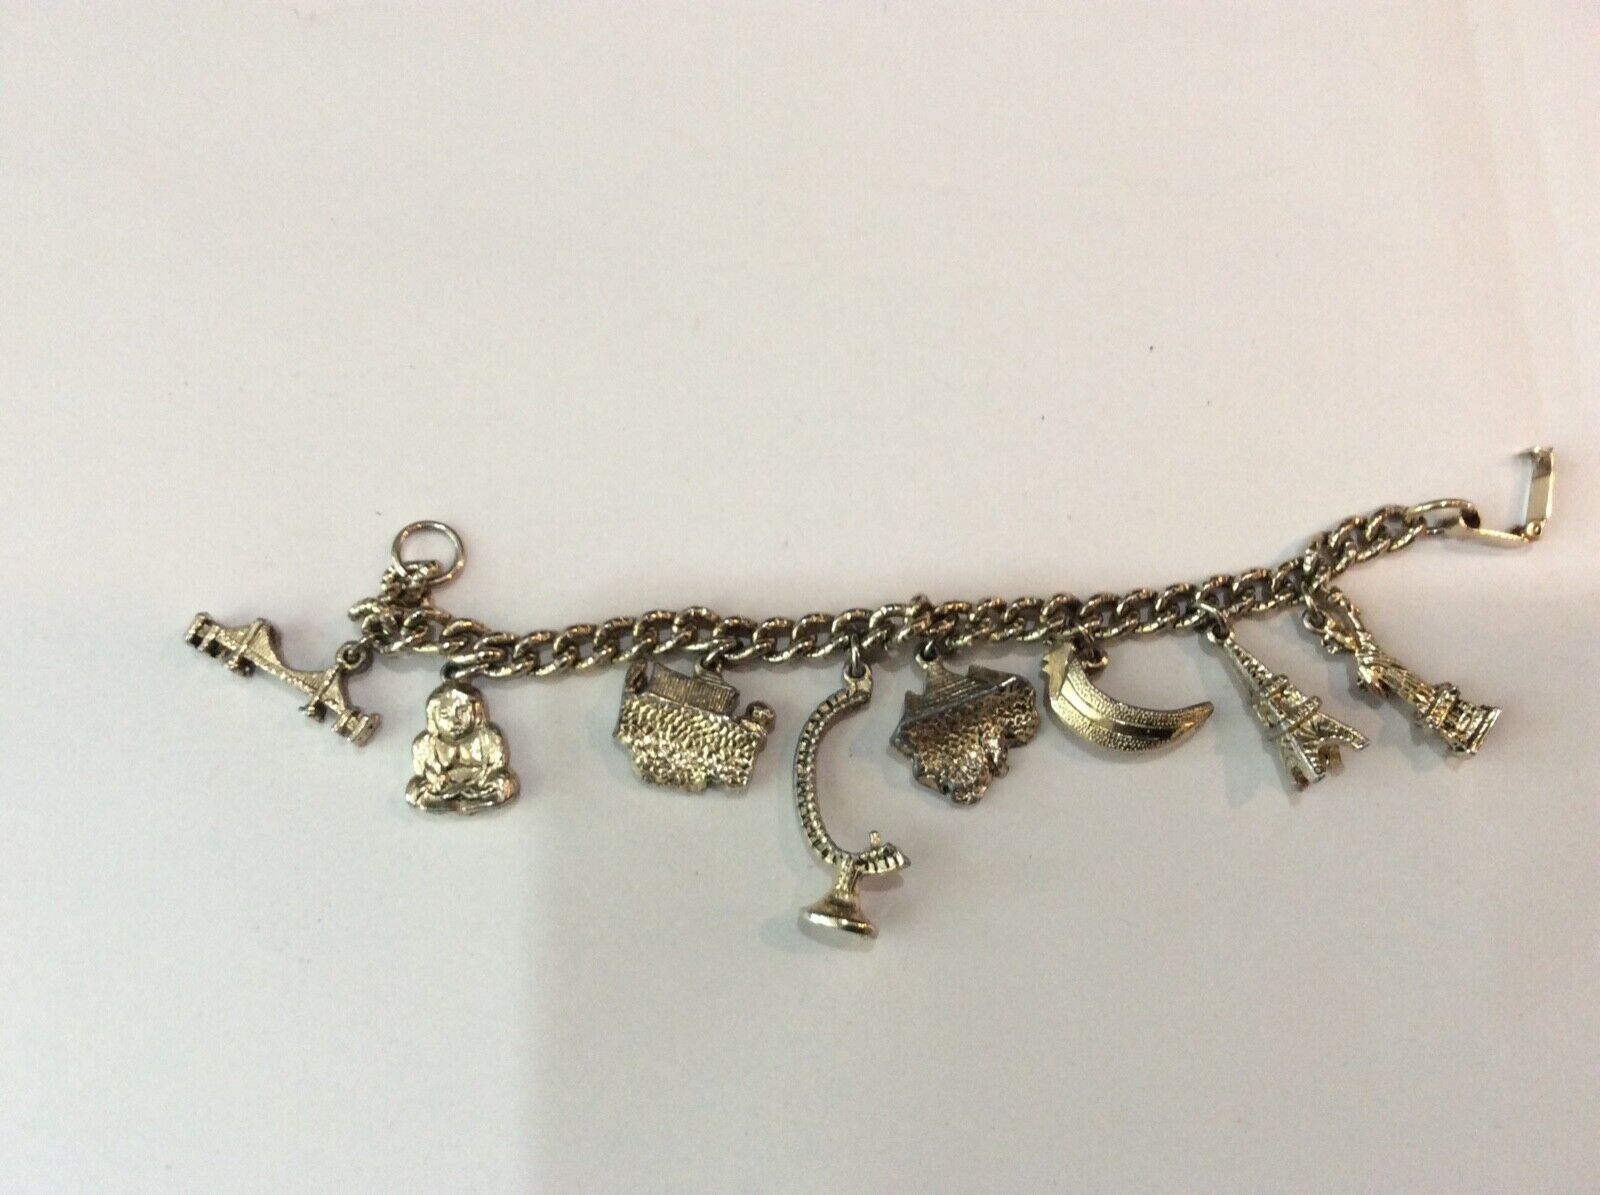 VTG GOLD TONED CHARM BRACELET WITH 8 CHARMS